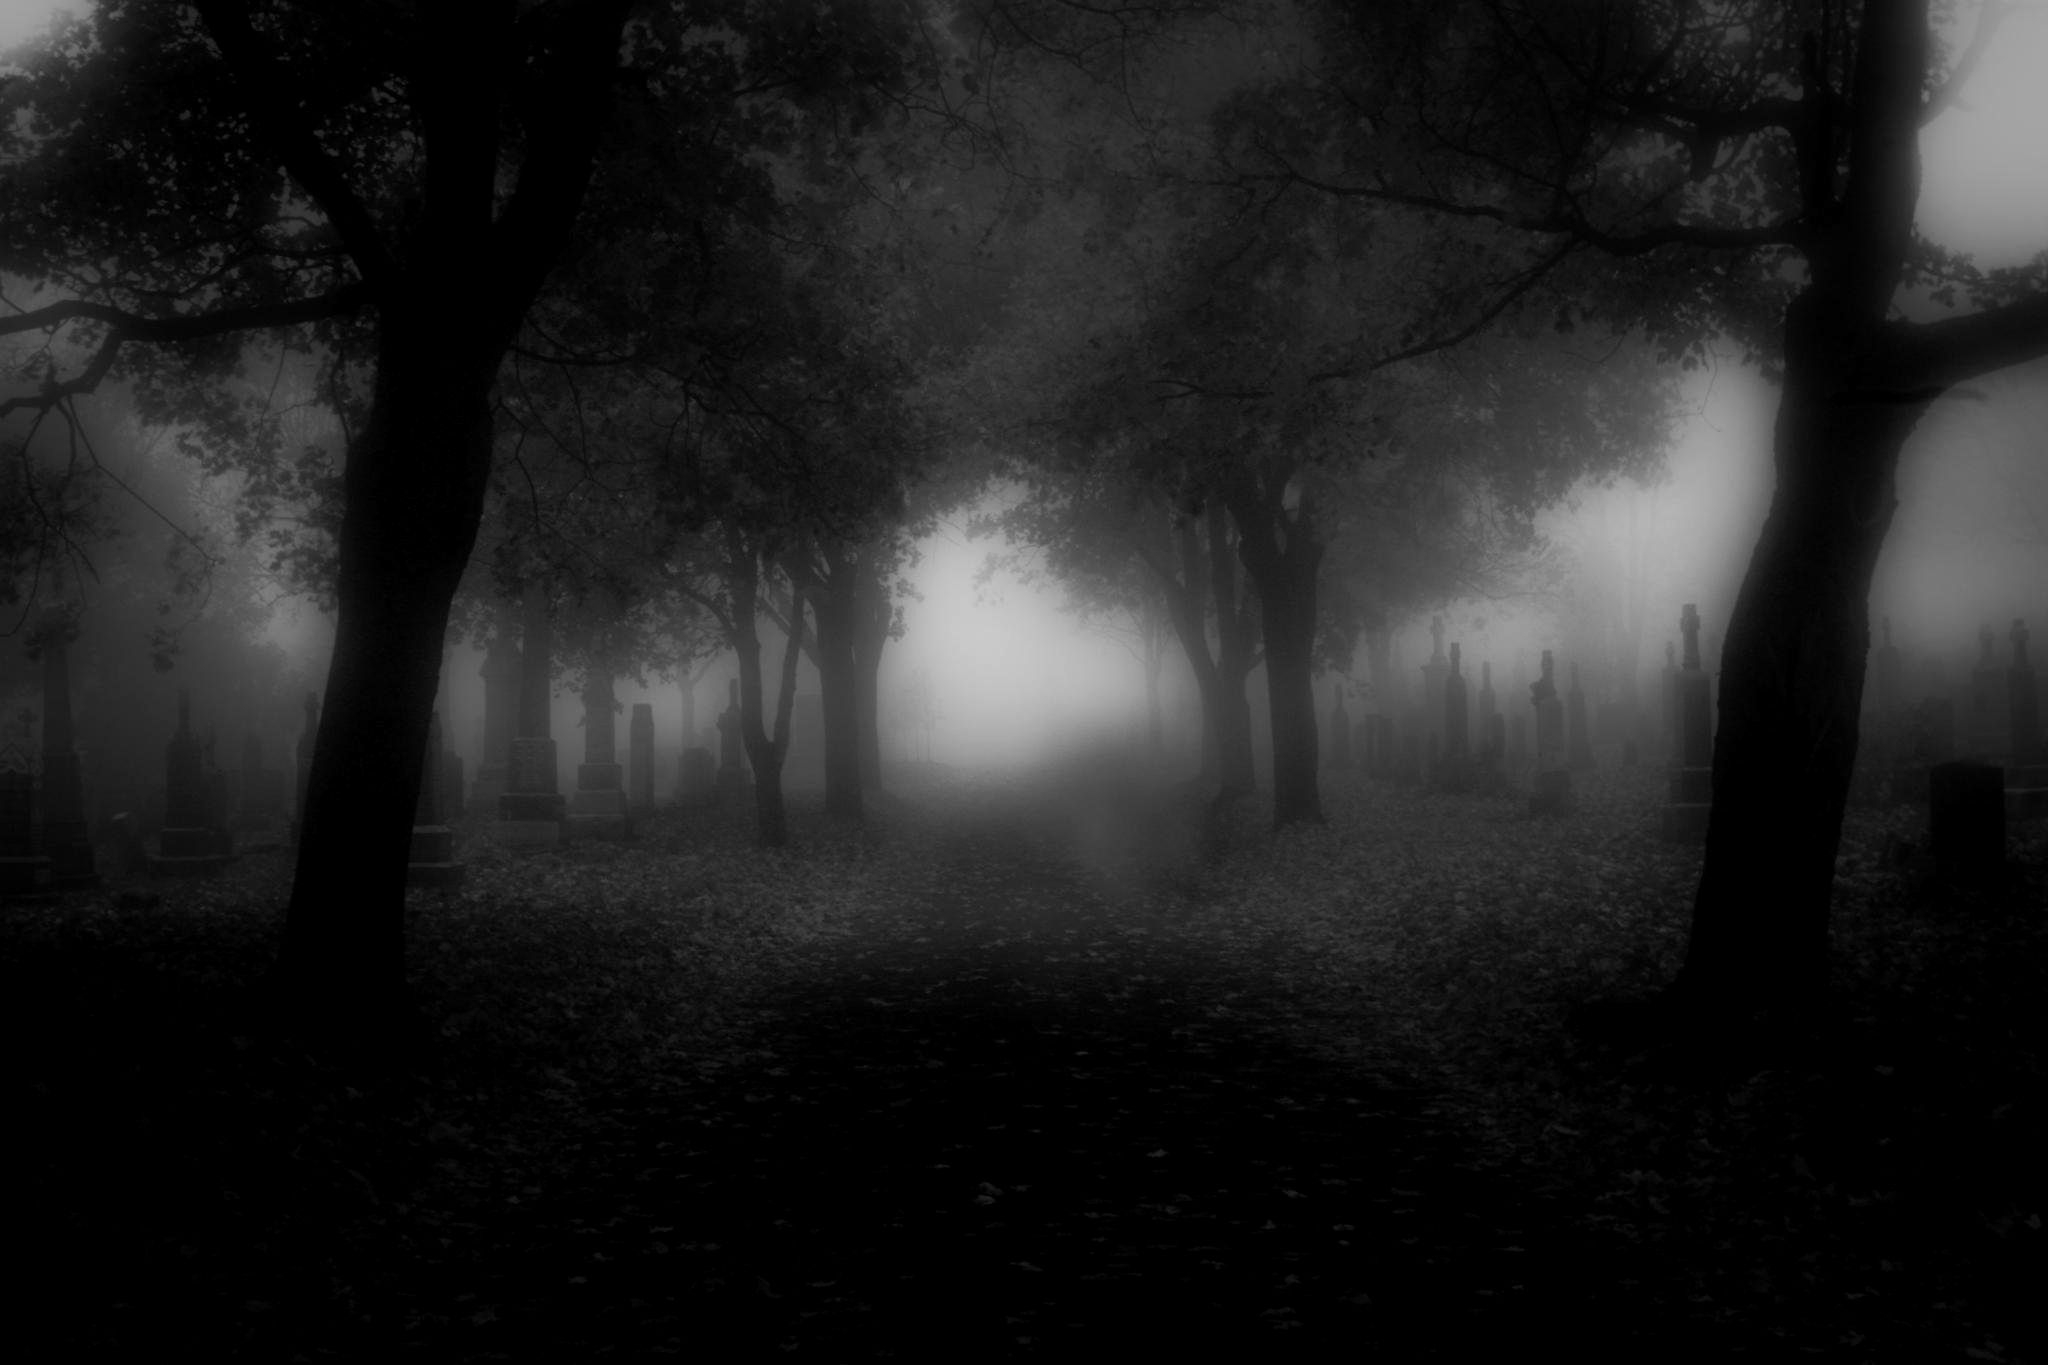 2048x1365 Dark Scary 4K Wallpaper Trick | Scary wallpaper, Scary backgrounds, Creepy backgrounds